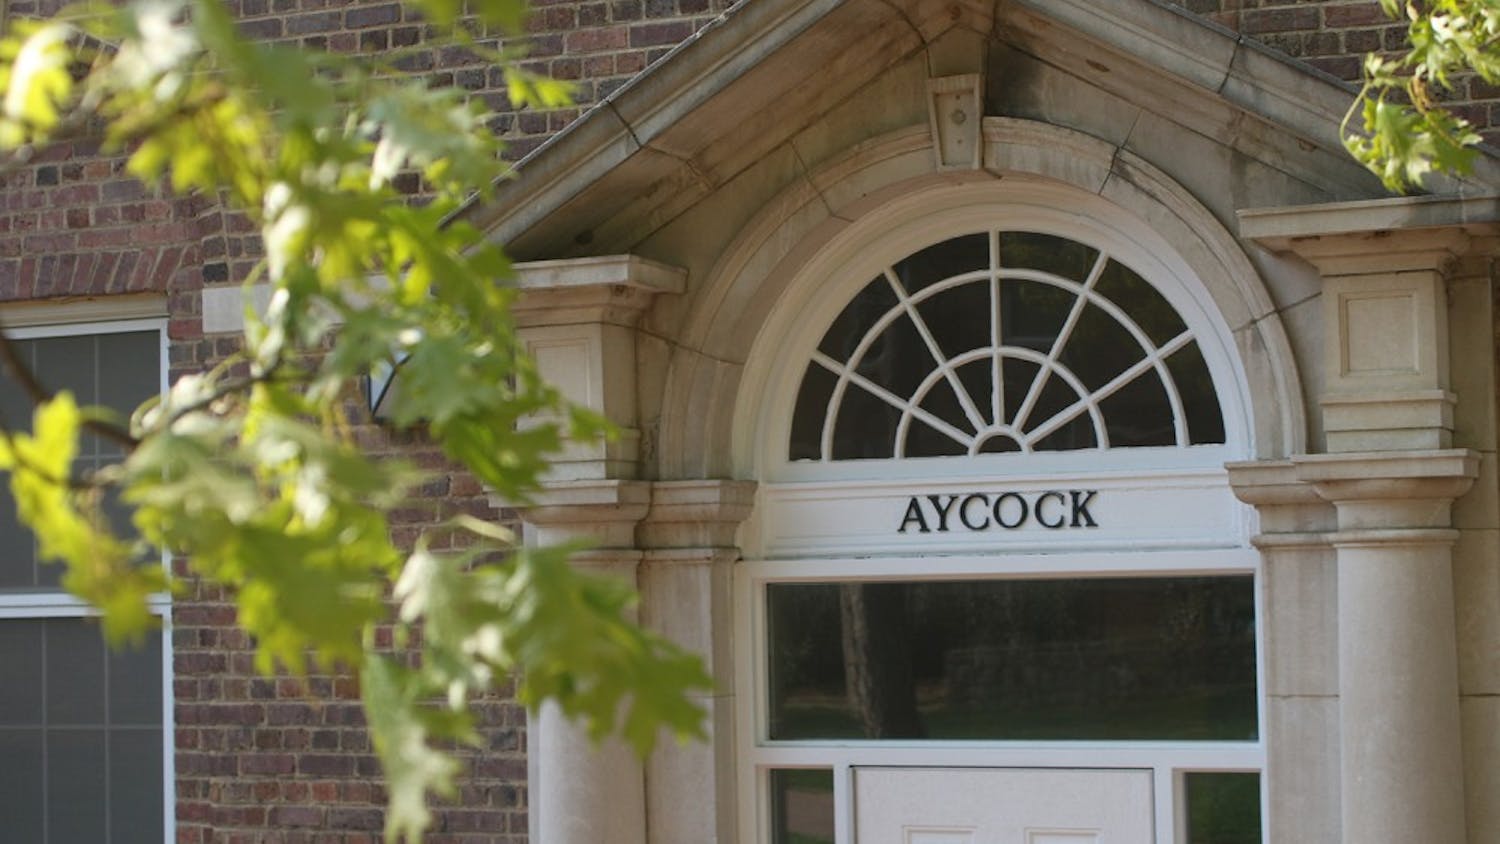 CORRECTION: A former version of this photo caption incorrectly identified the university that most recently changed a name of a campus building. The university was UNC-Greensboro.
In February, UNC-Greensboro became the third university in the state to remove Charles Brantley Aycock’s name from a campus building.